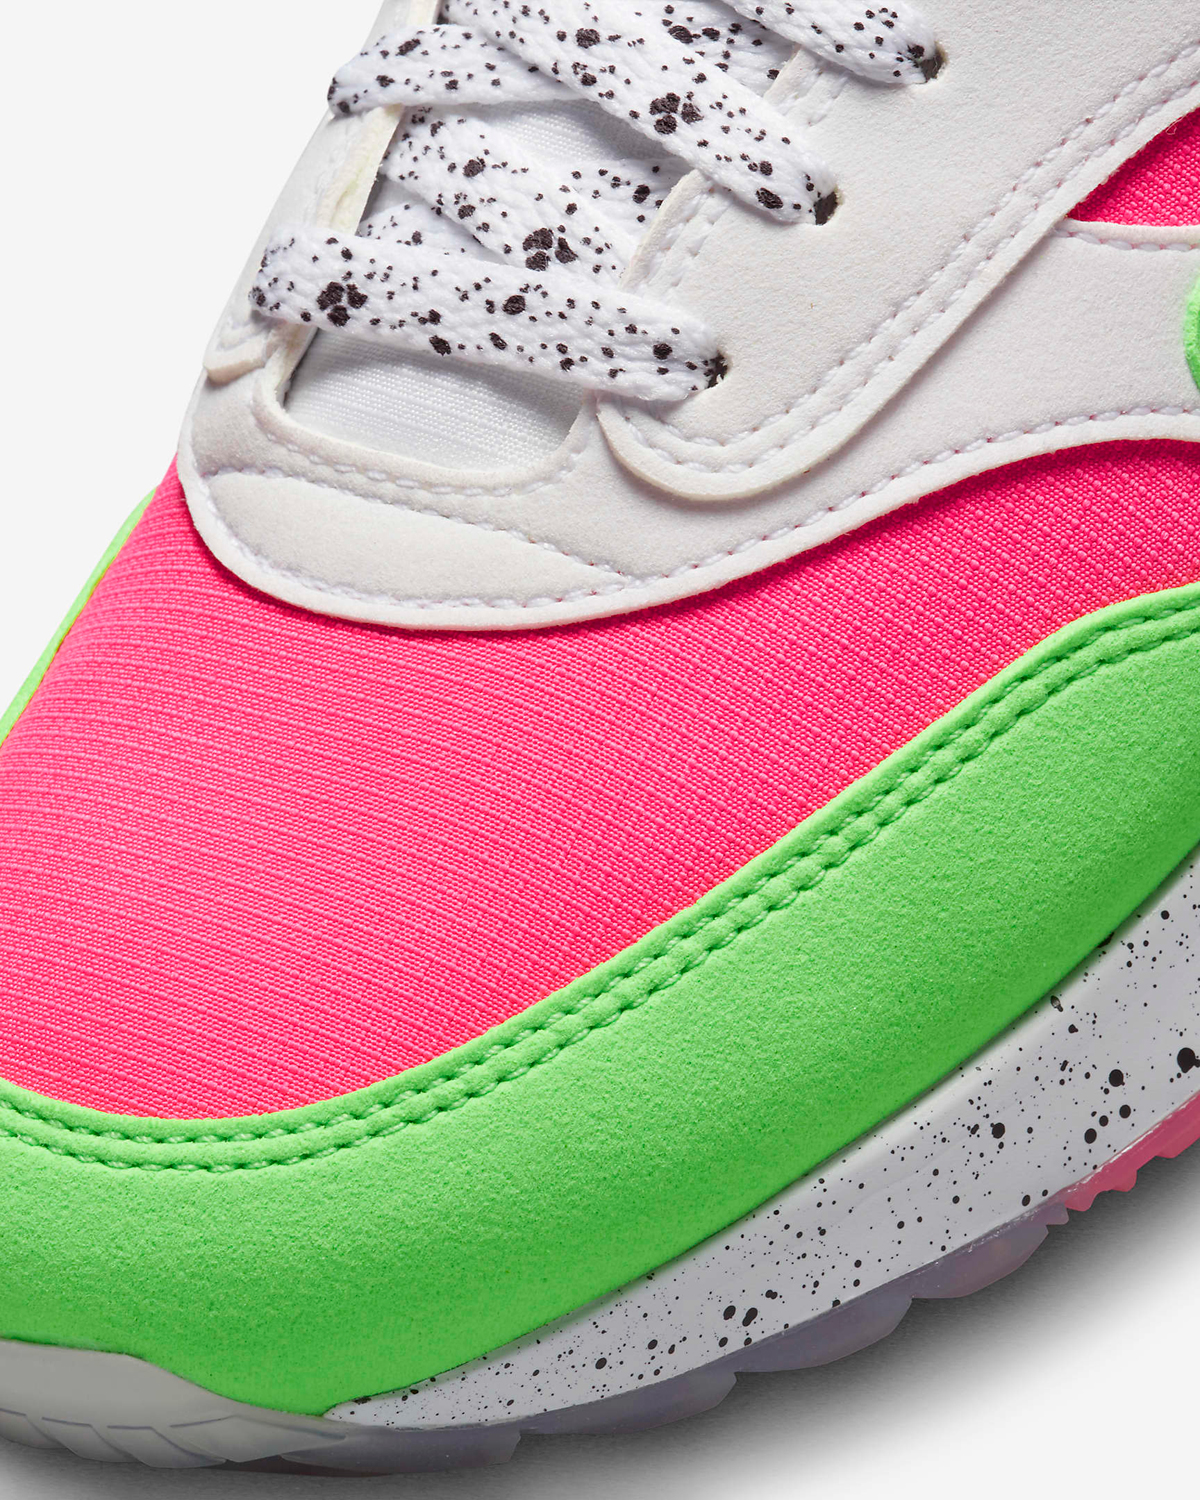 Nike-Air-Max-1-86-Golf-Water-Melon-US-Open-Release-Date-7